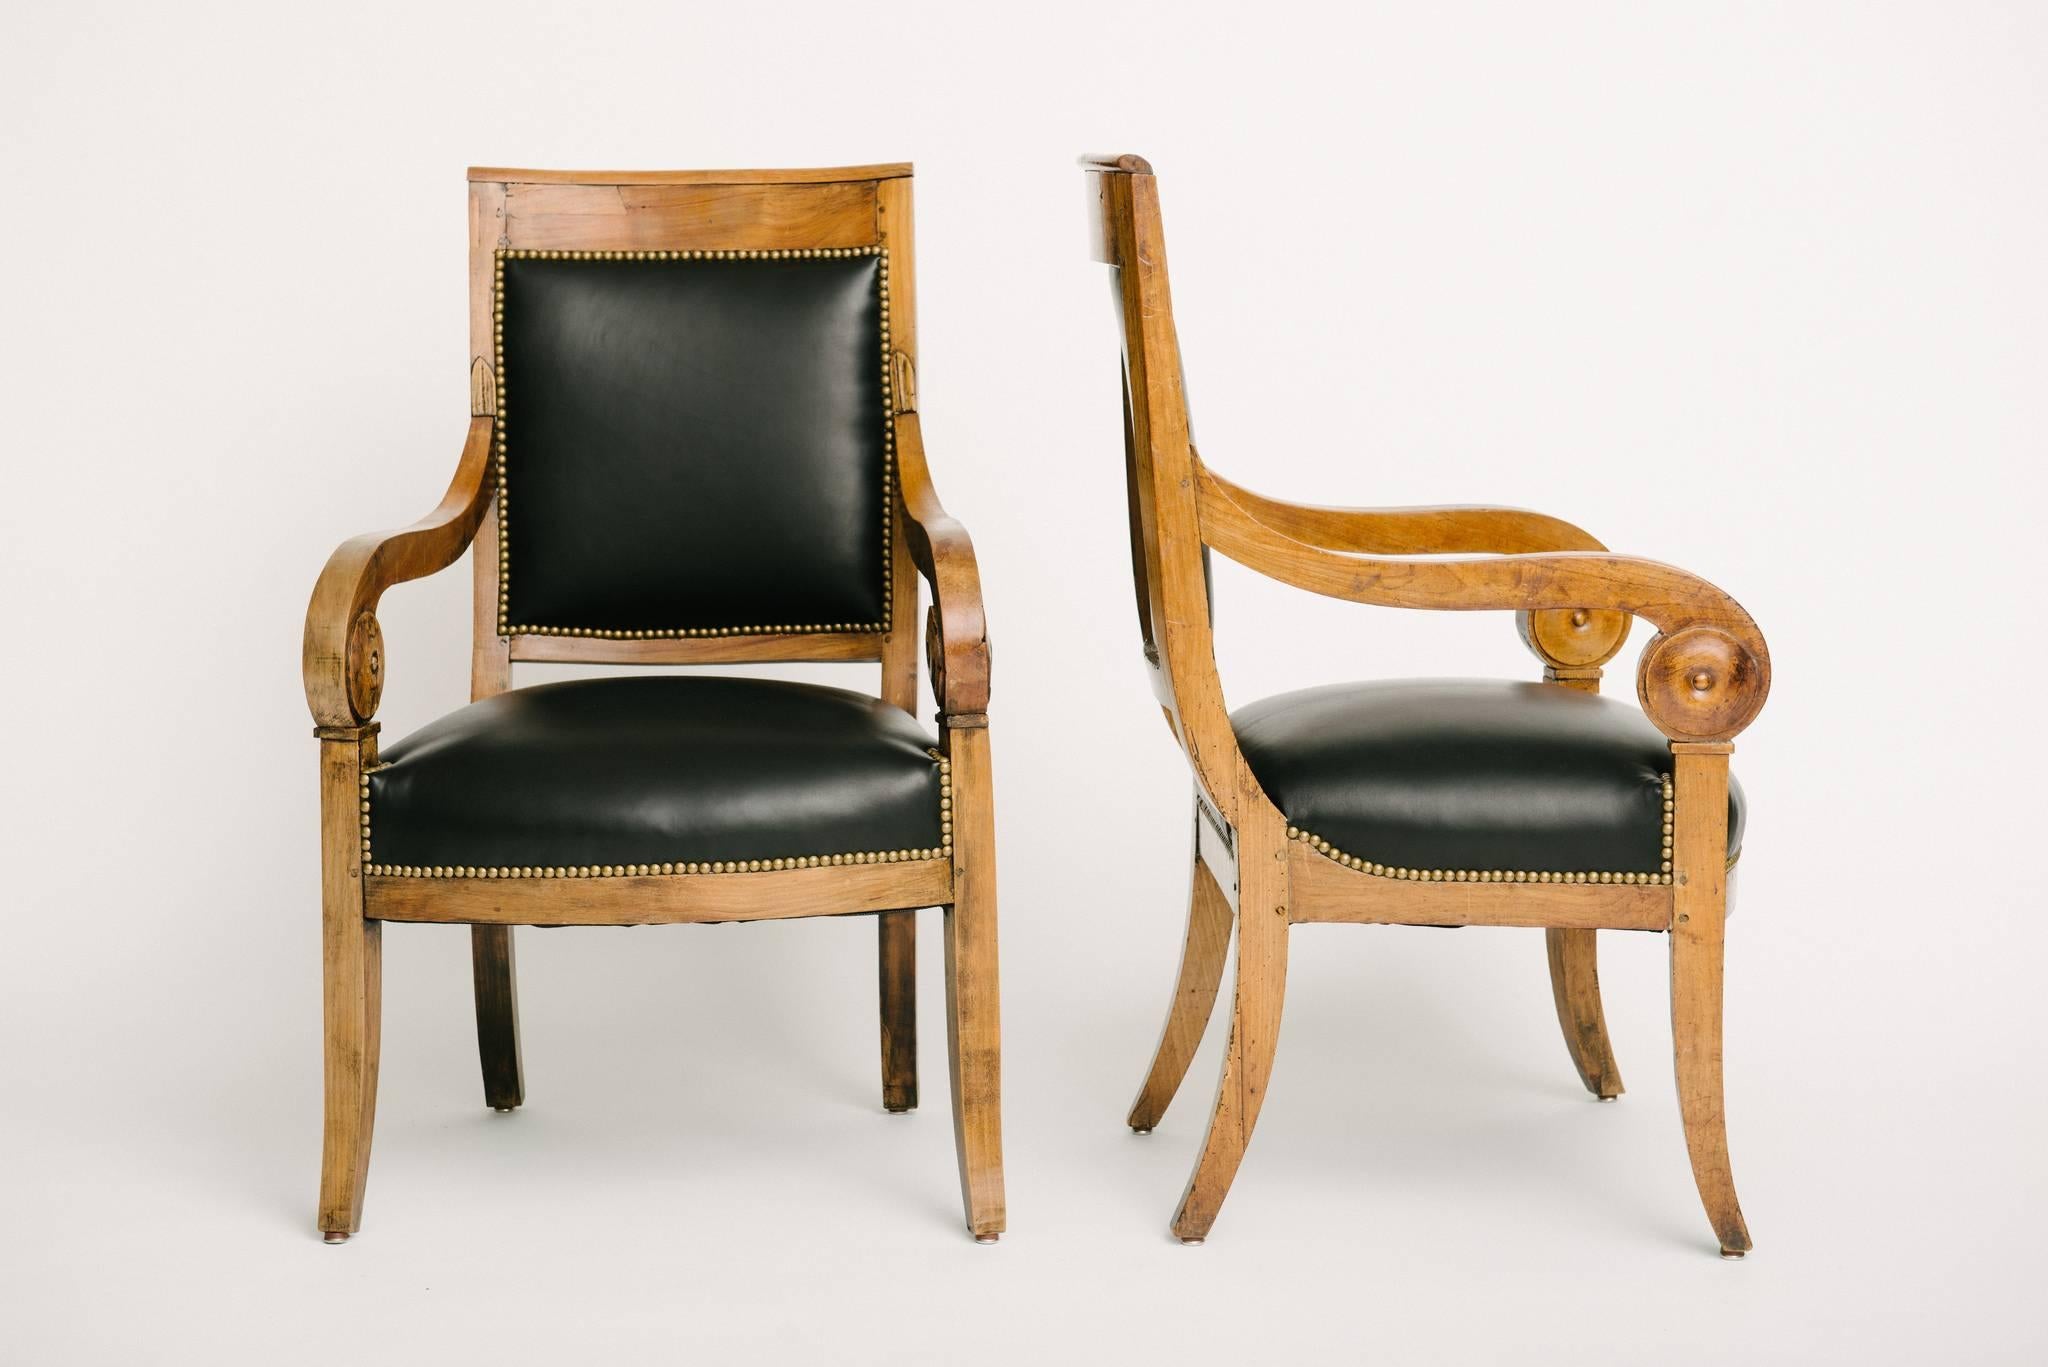 A handsome pair of Charles X armchairs newly upholstered in black lambskin leather with nailhead detail.